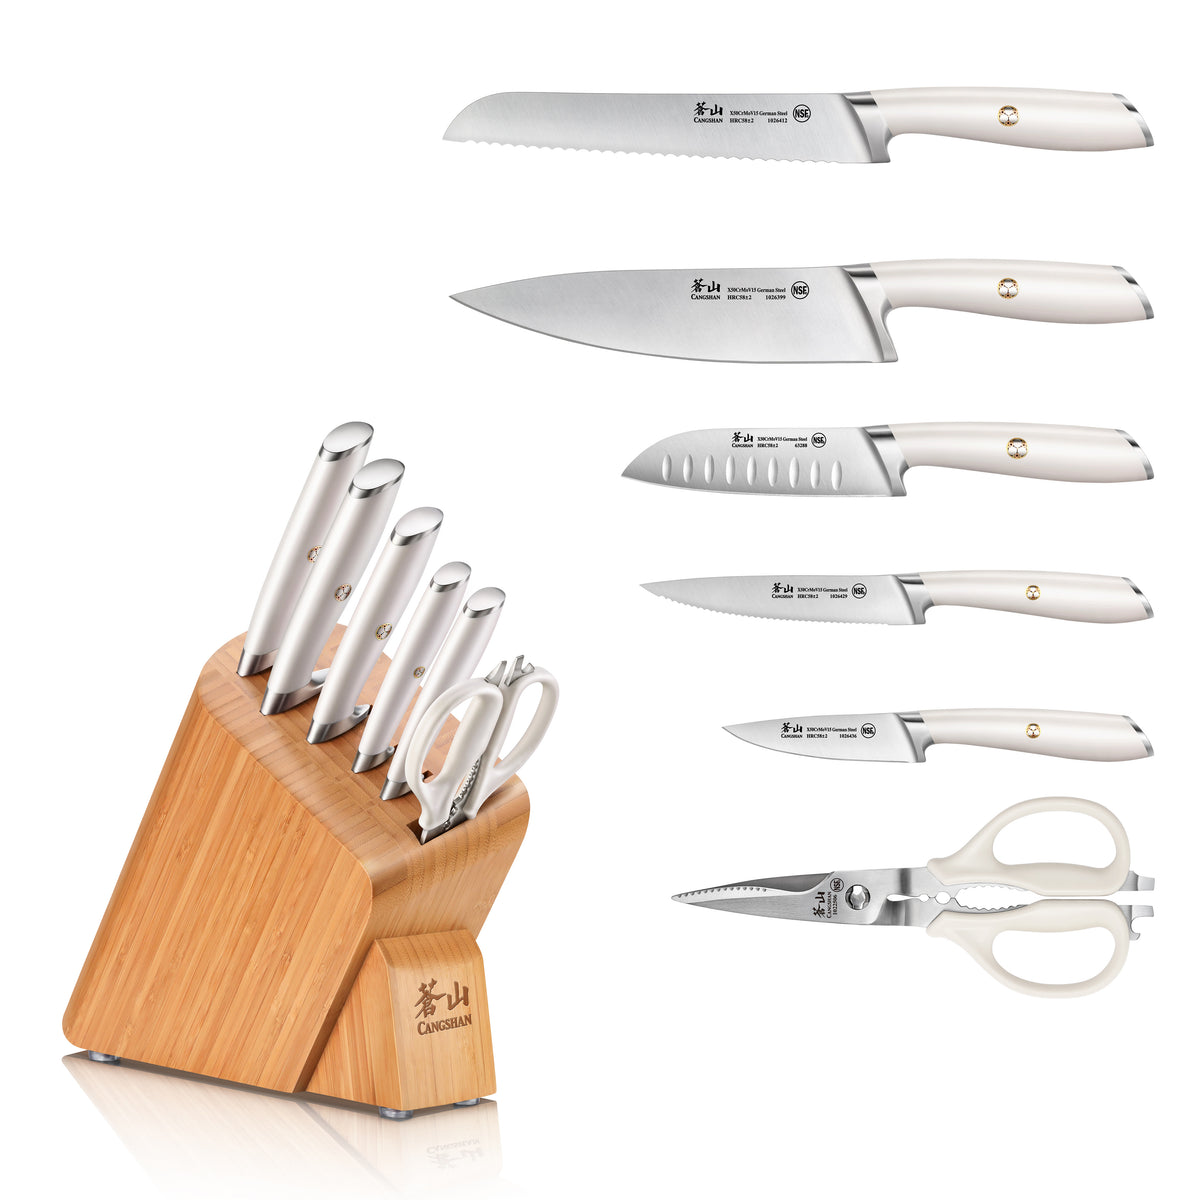 Cangshan S1 Series 1023718 German Steel Forged 7-Piece BBQ Knife Set